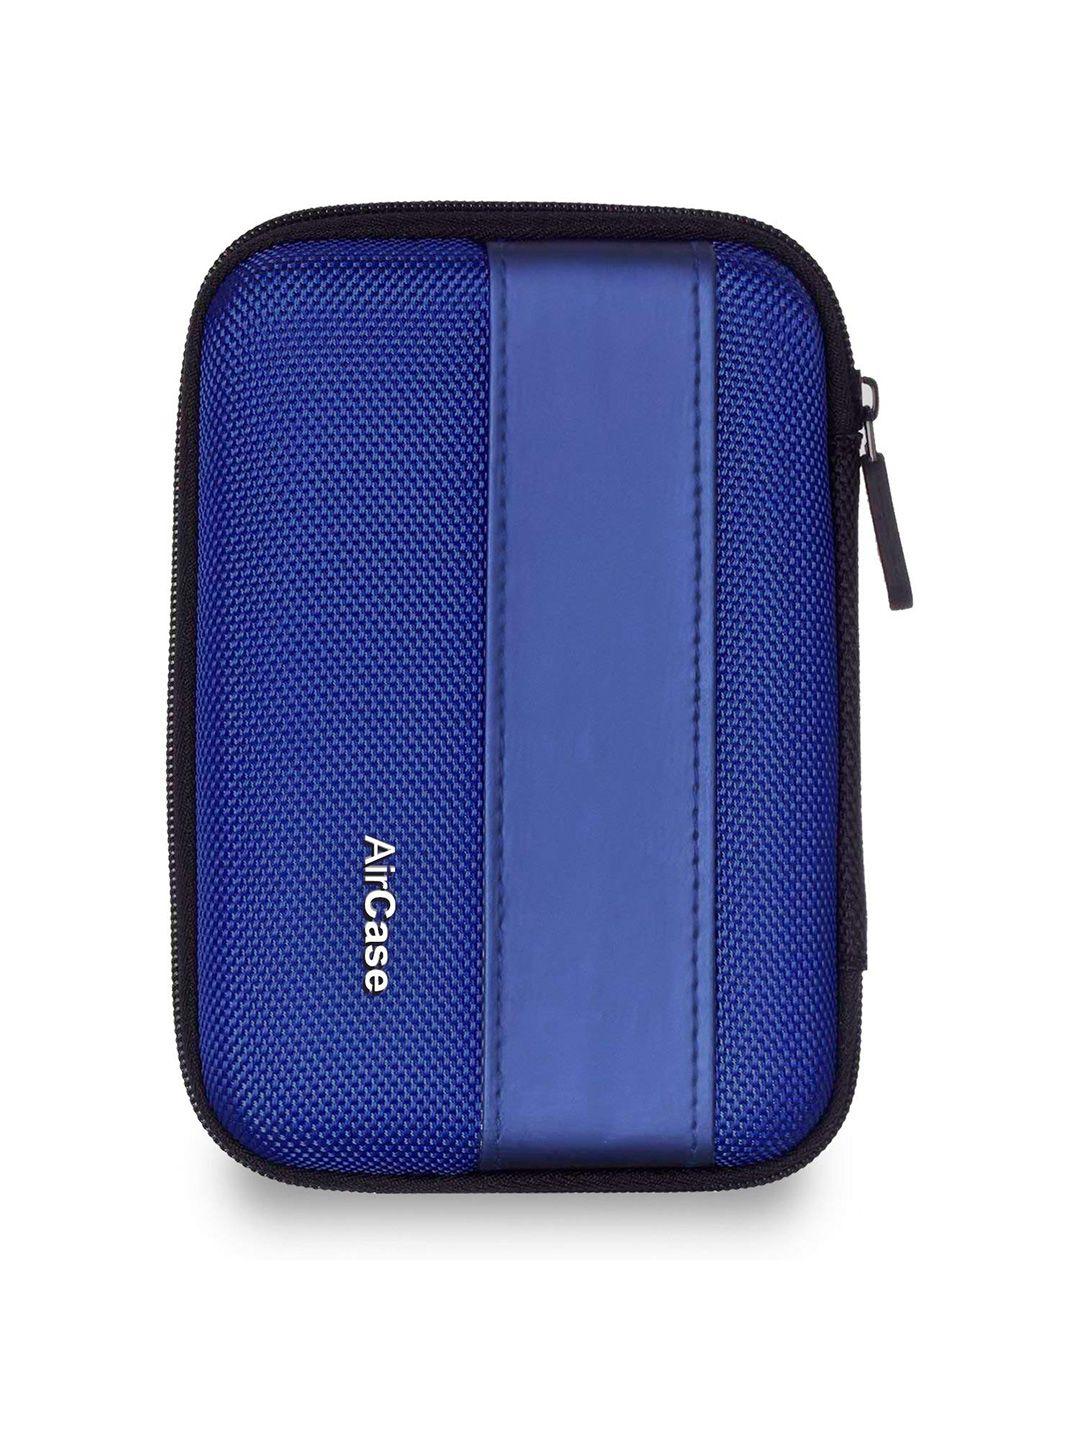 aircase nylon 2.5 inch water resistance hard drive case/cover